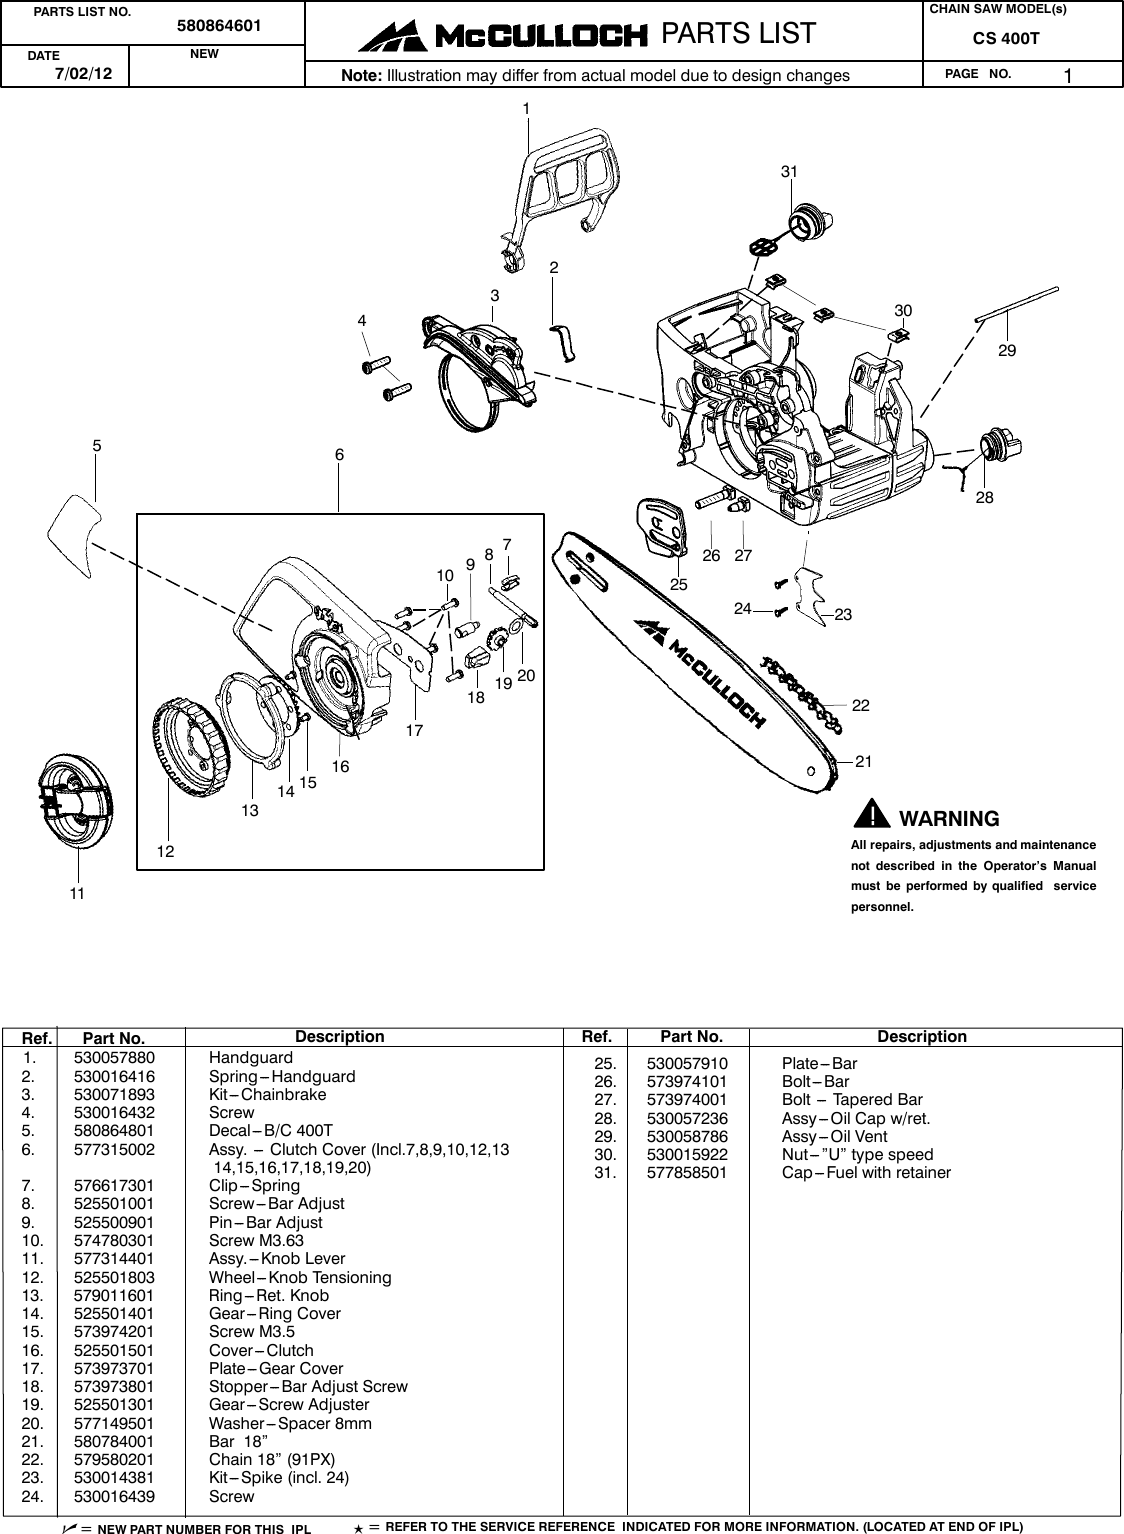 Page 1 of 3 - McCulloch 580864601 IPL, McCulloch, CS 400T, 967156318, 2012-08, Chain Saw User Manual  To The Bb5133b3-e36e-45ab-986c-f56c54bc8378